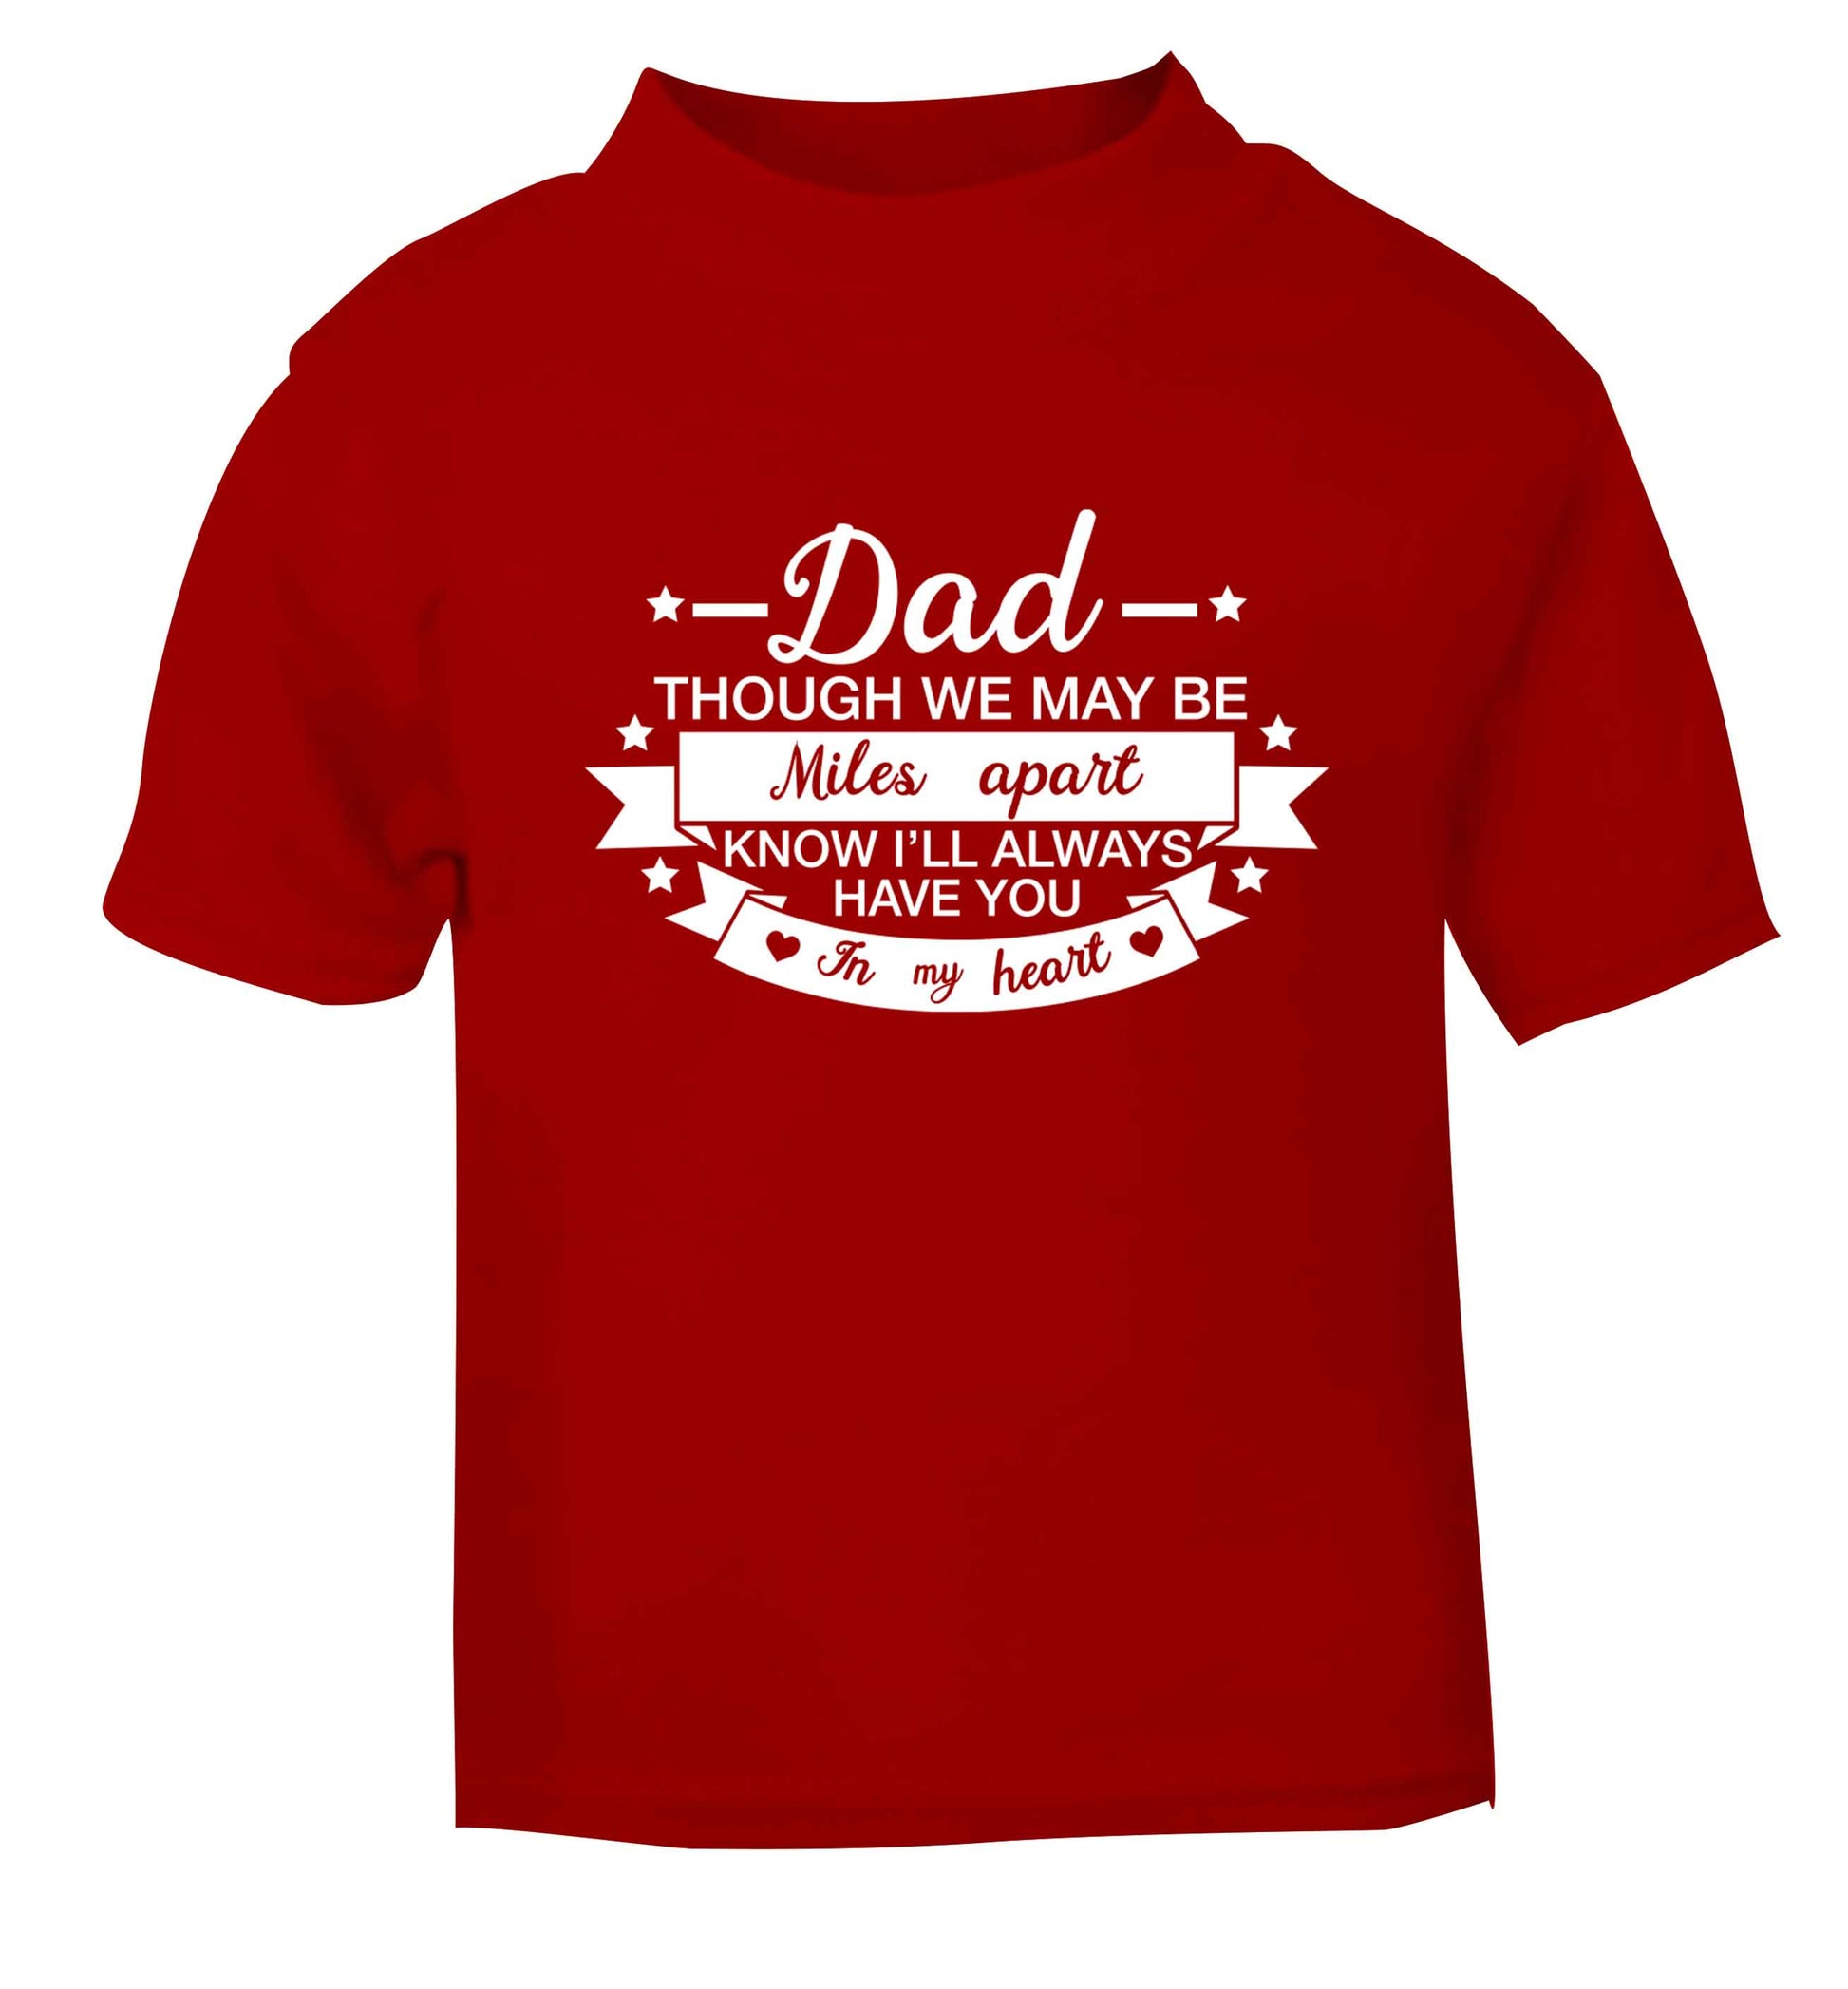 Dad though we are miles apart know I'll always have you in my heart red baby toddler Tshirt 2 Years